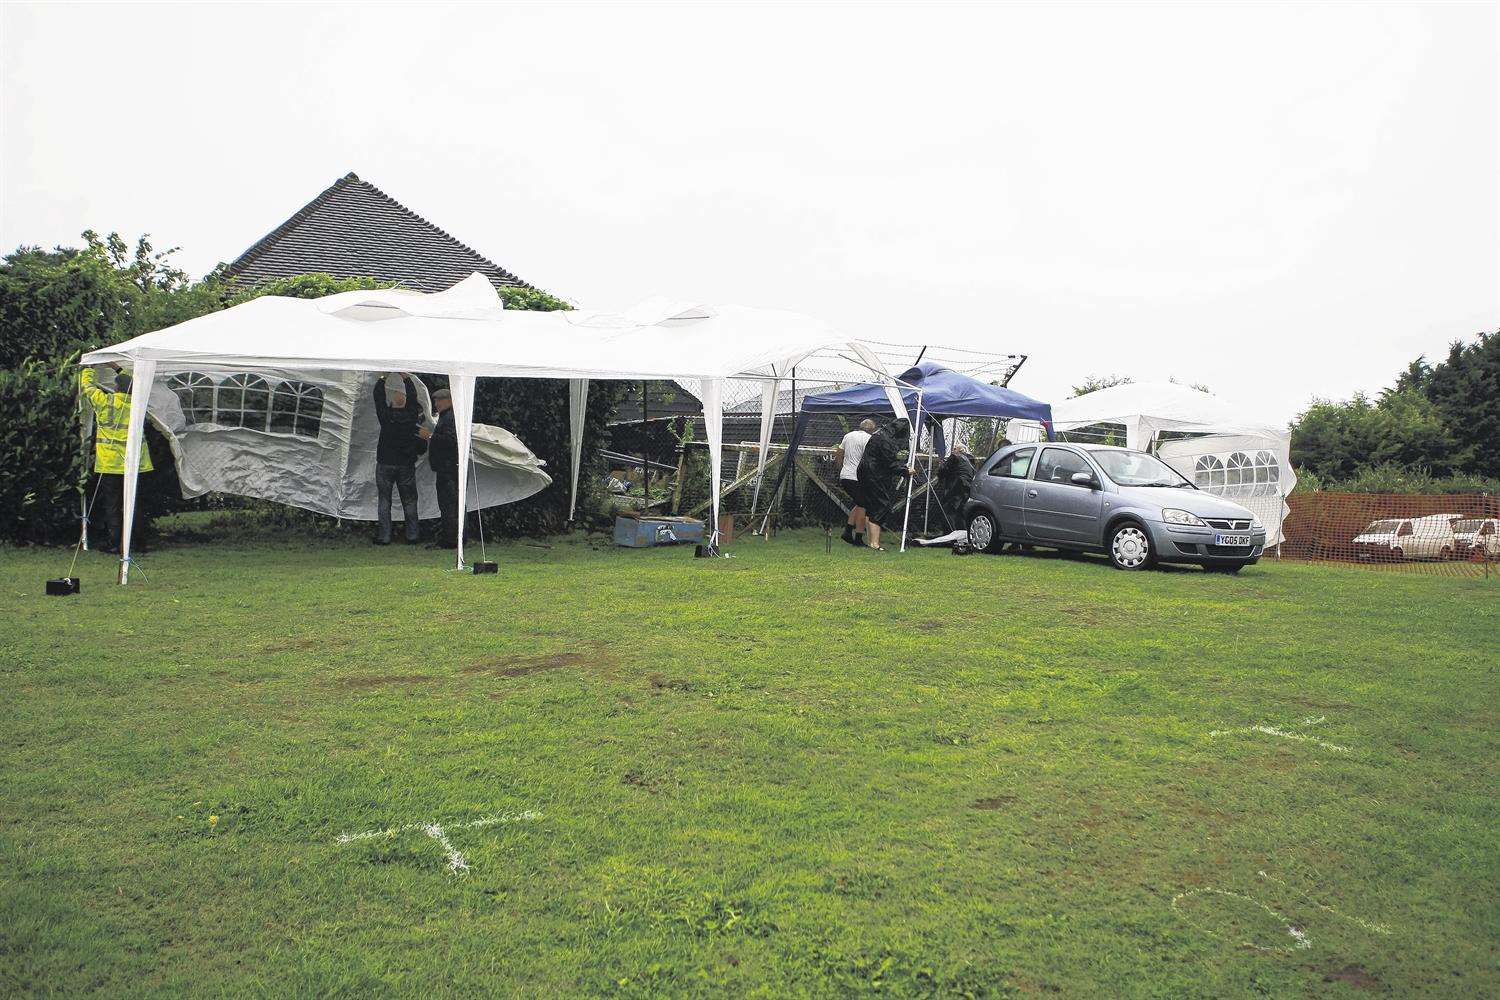 Volunteers struggle to keep gazebos in place during the Hurricane Bertha winds.